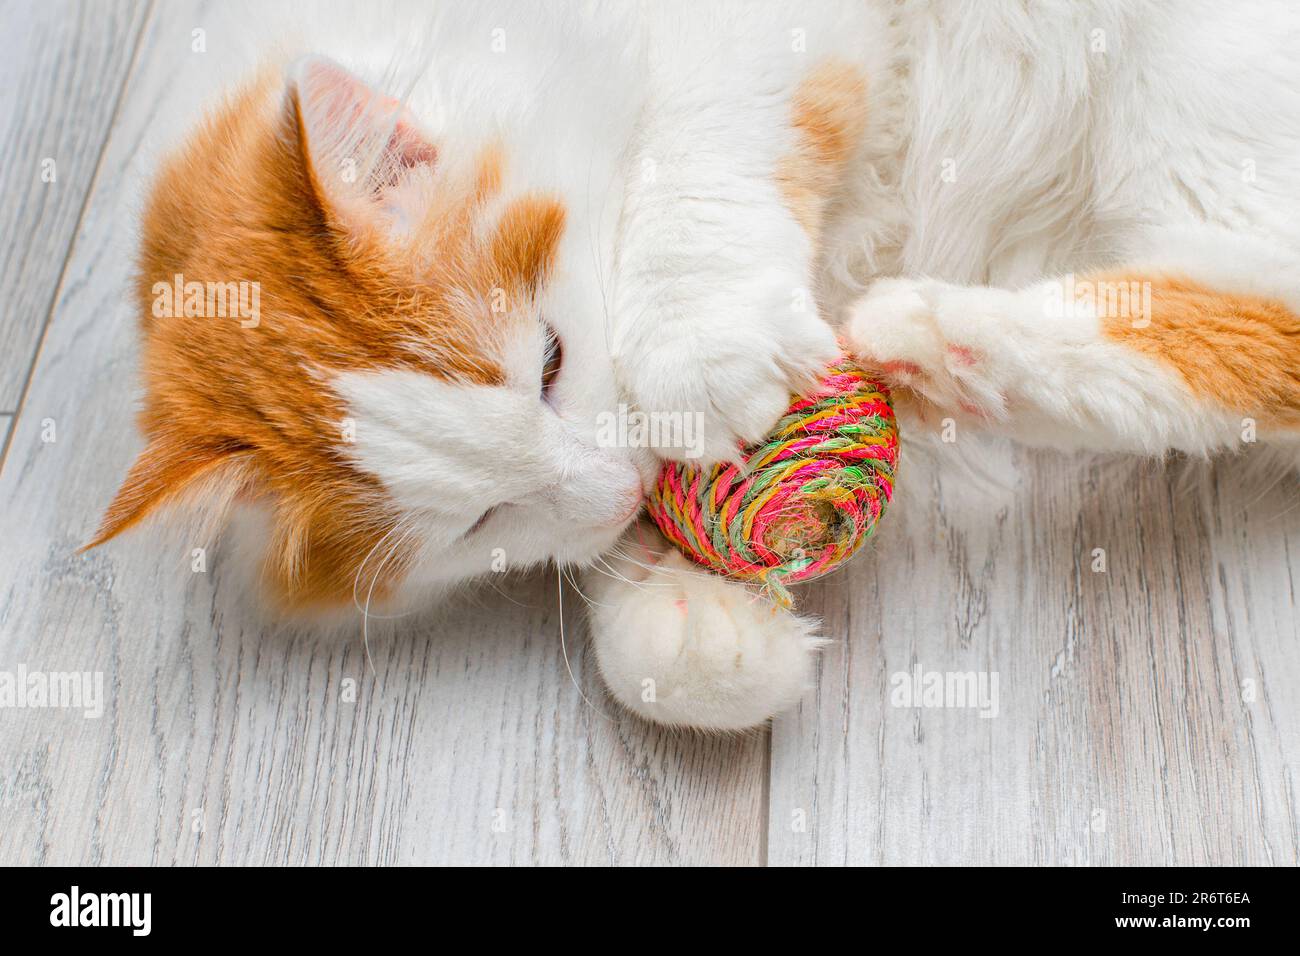 domestic kitten plays with a knitted ball. kitten grabs a ball. cat toy Stock Photo